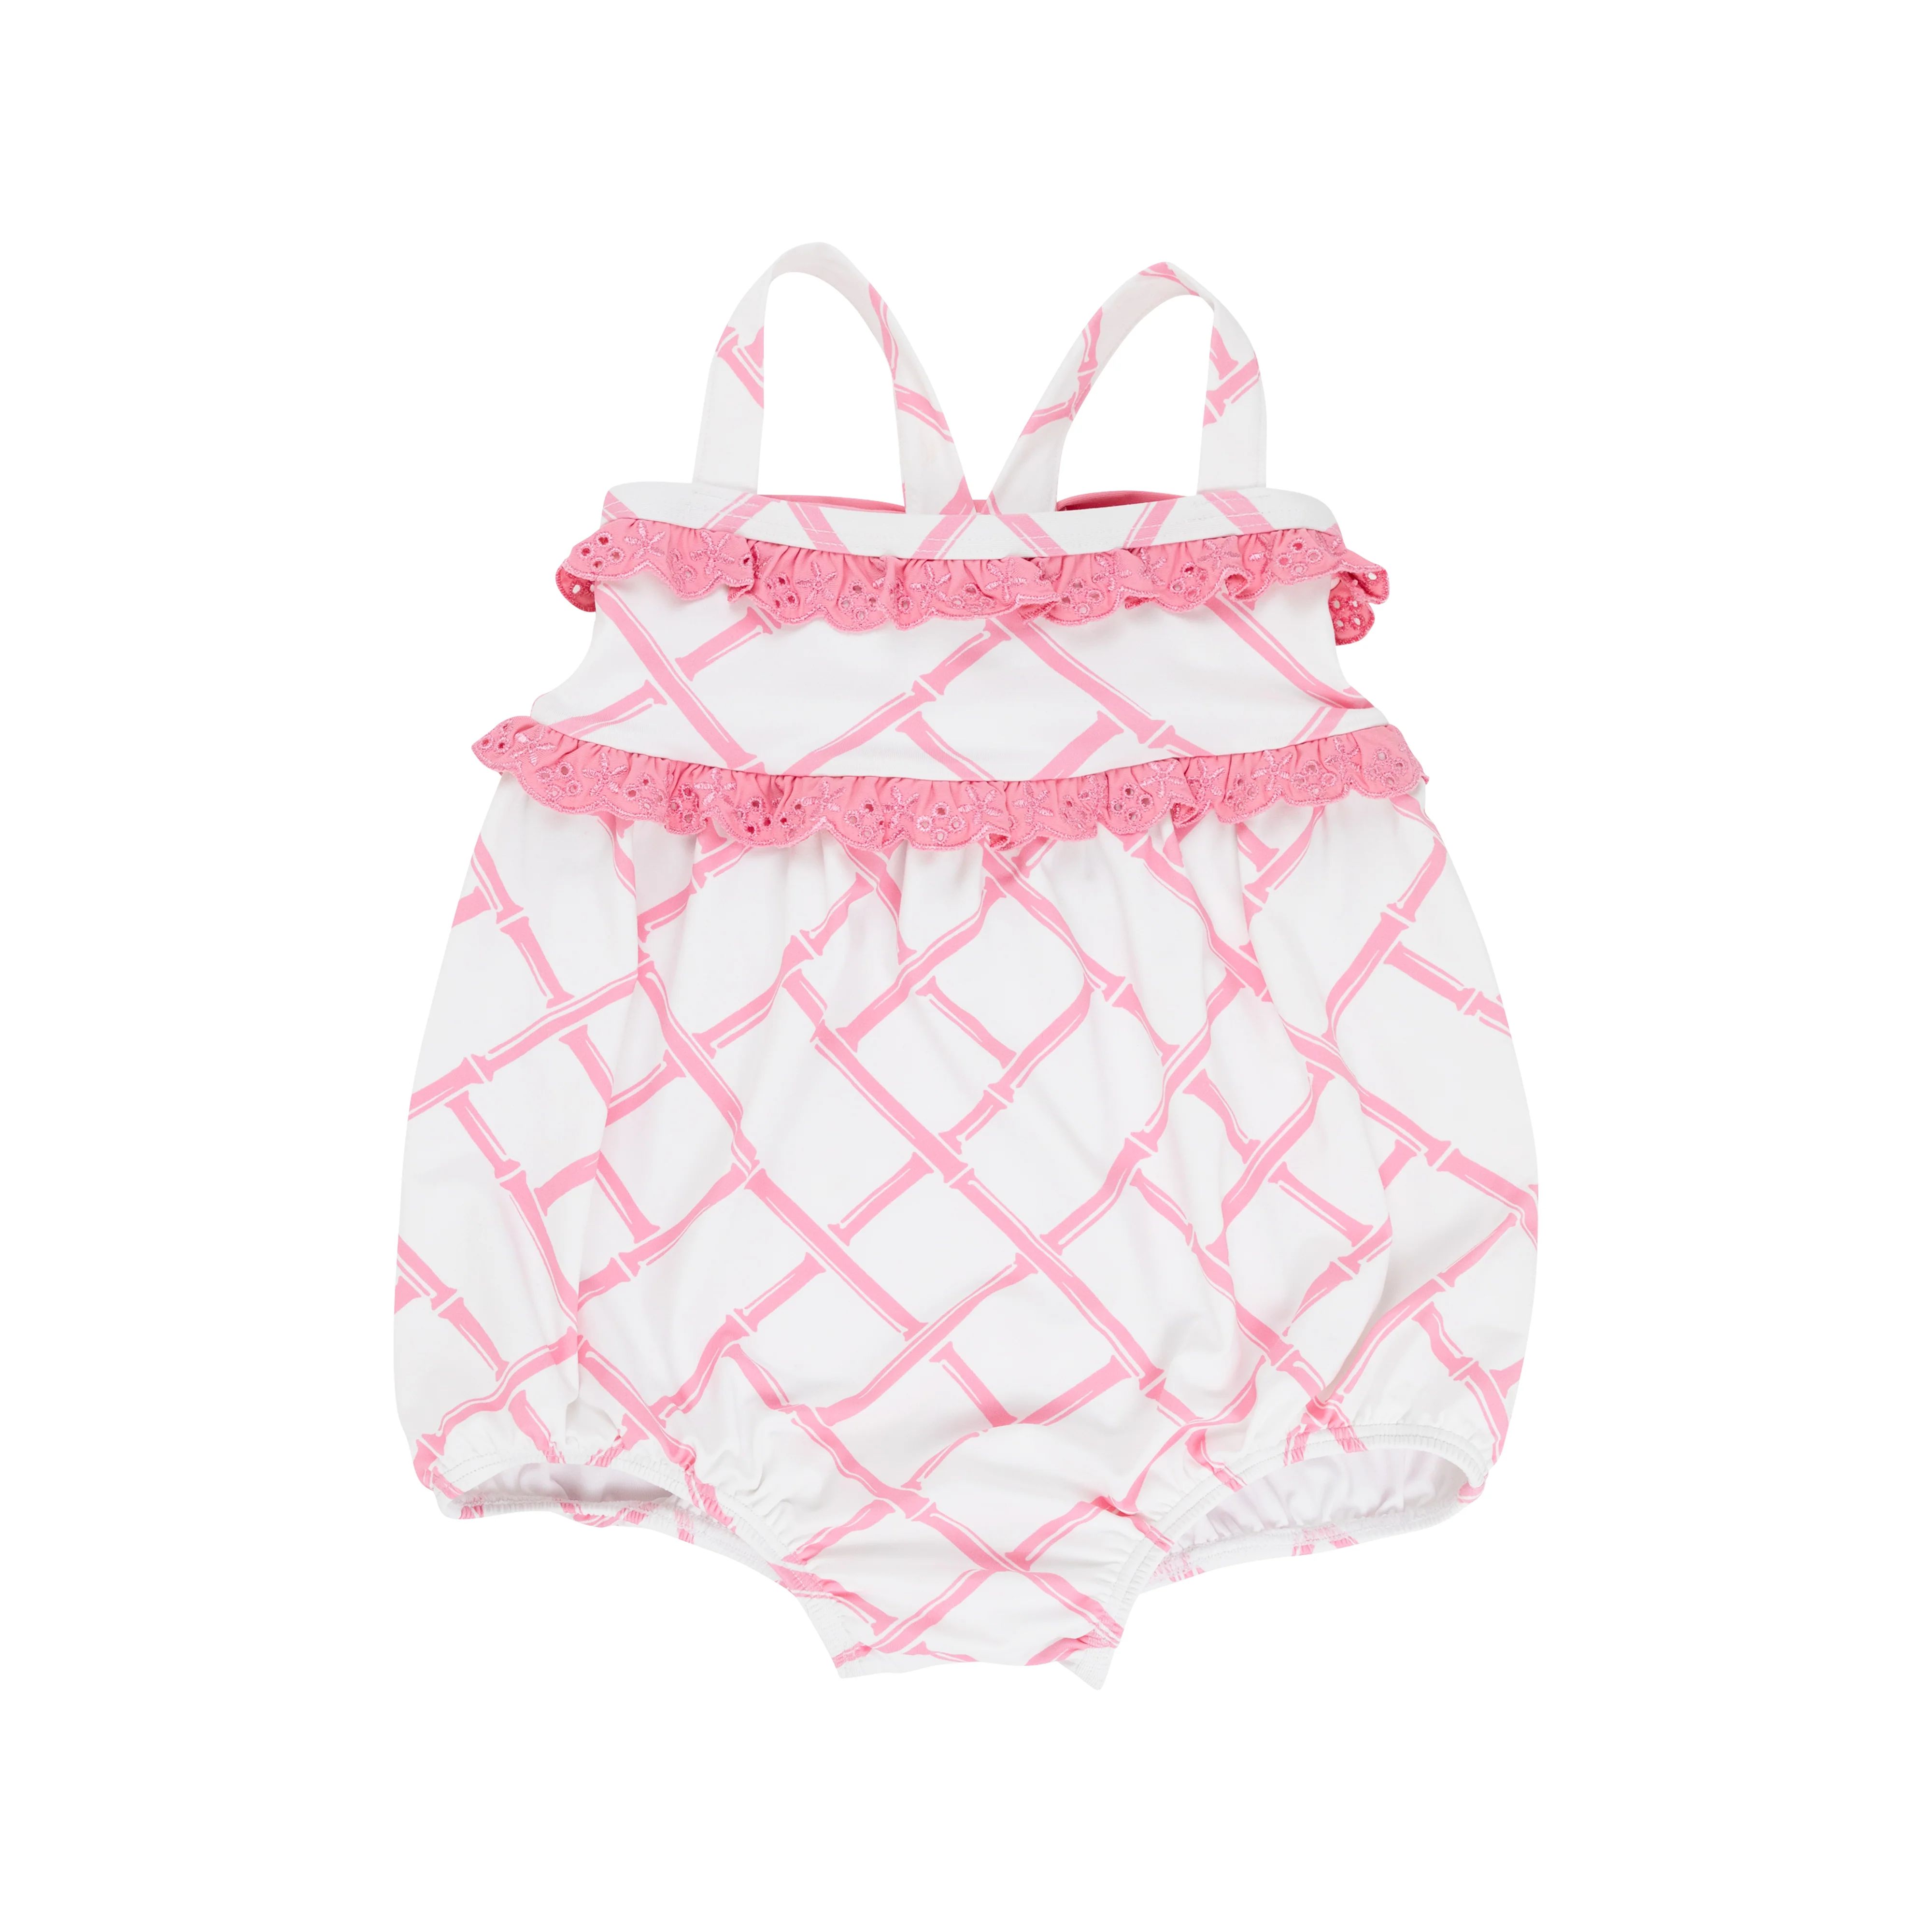 St. Bart's Bubble - Bamboo Proverbs with Hamptons Hot Pink | The Beaufort Bonnet Company